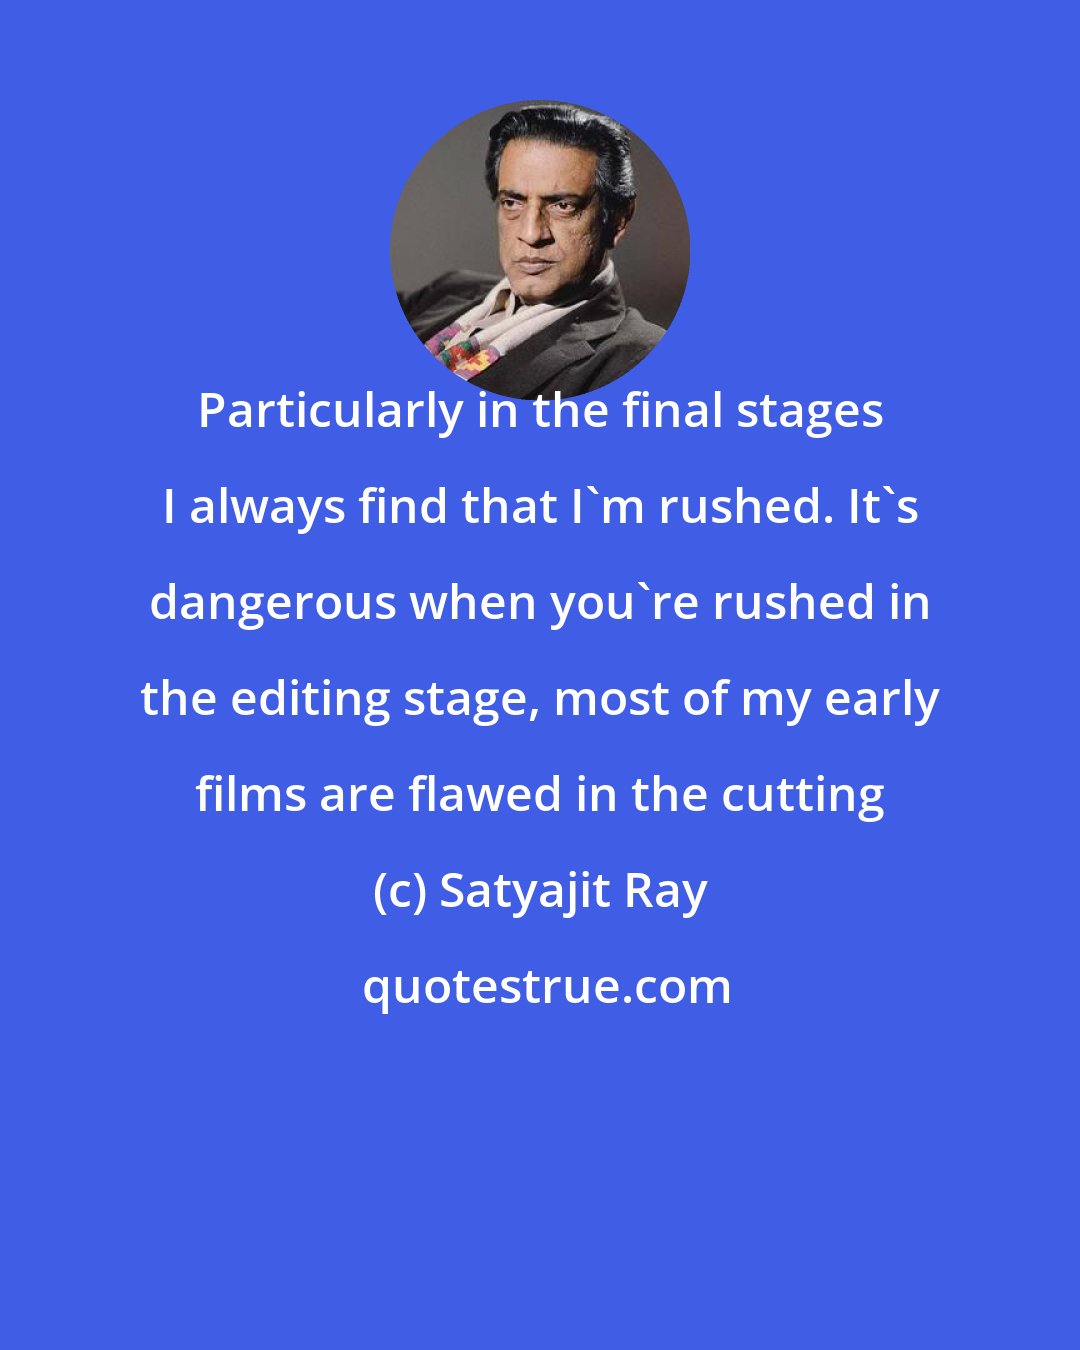 Satyajit Ray: Particularly in the final stages I always find that I'm rushed. It's dangerous when you're rushed in the editing stage, most of my early films are flawed in the cutting